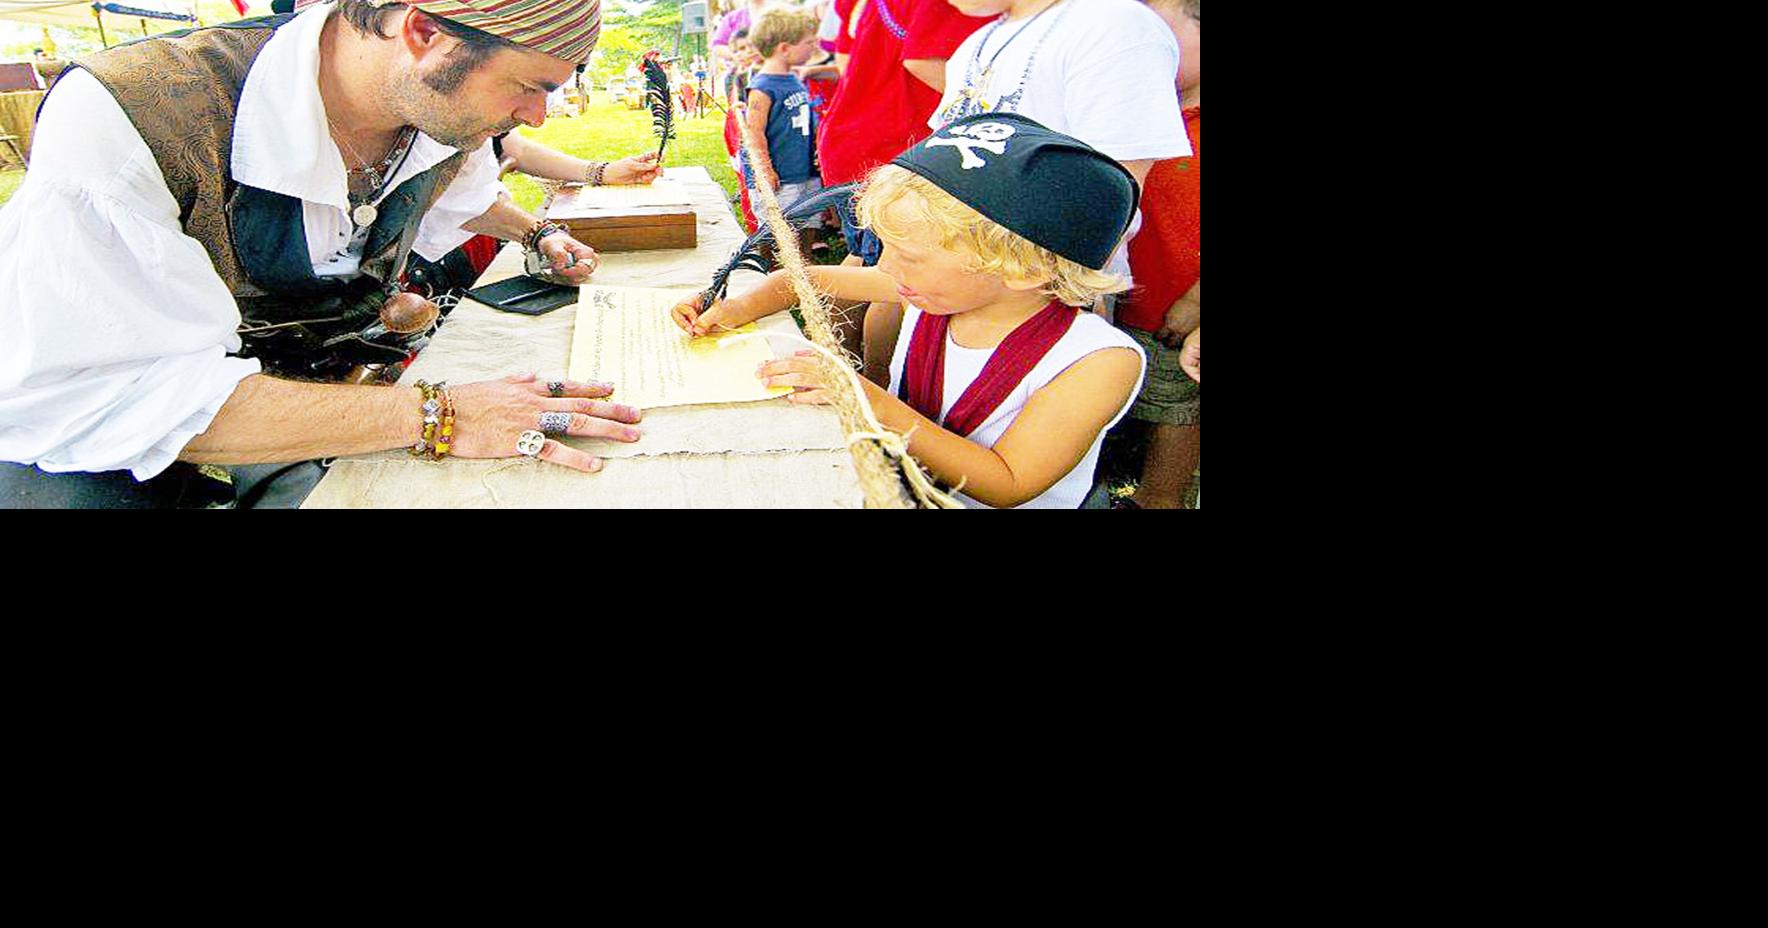 Pirate festival continues in Olcott Local News